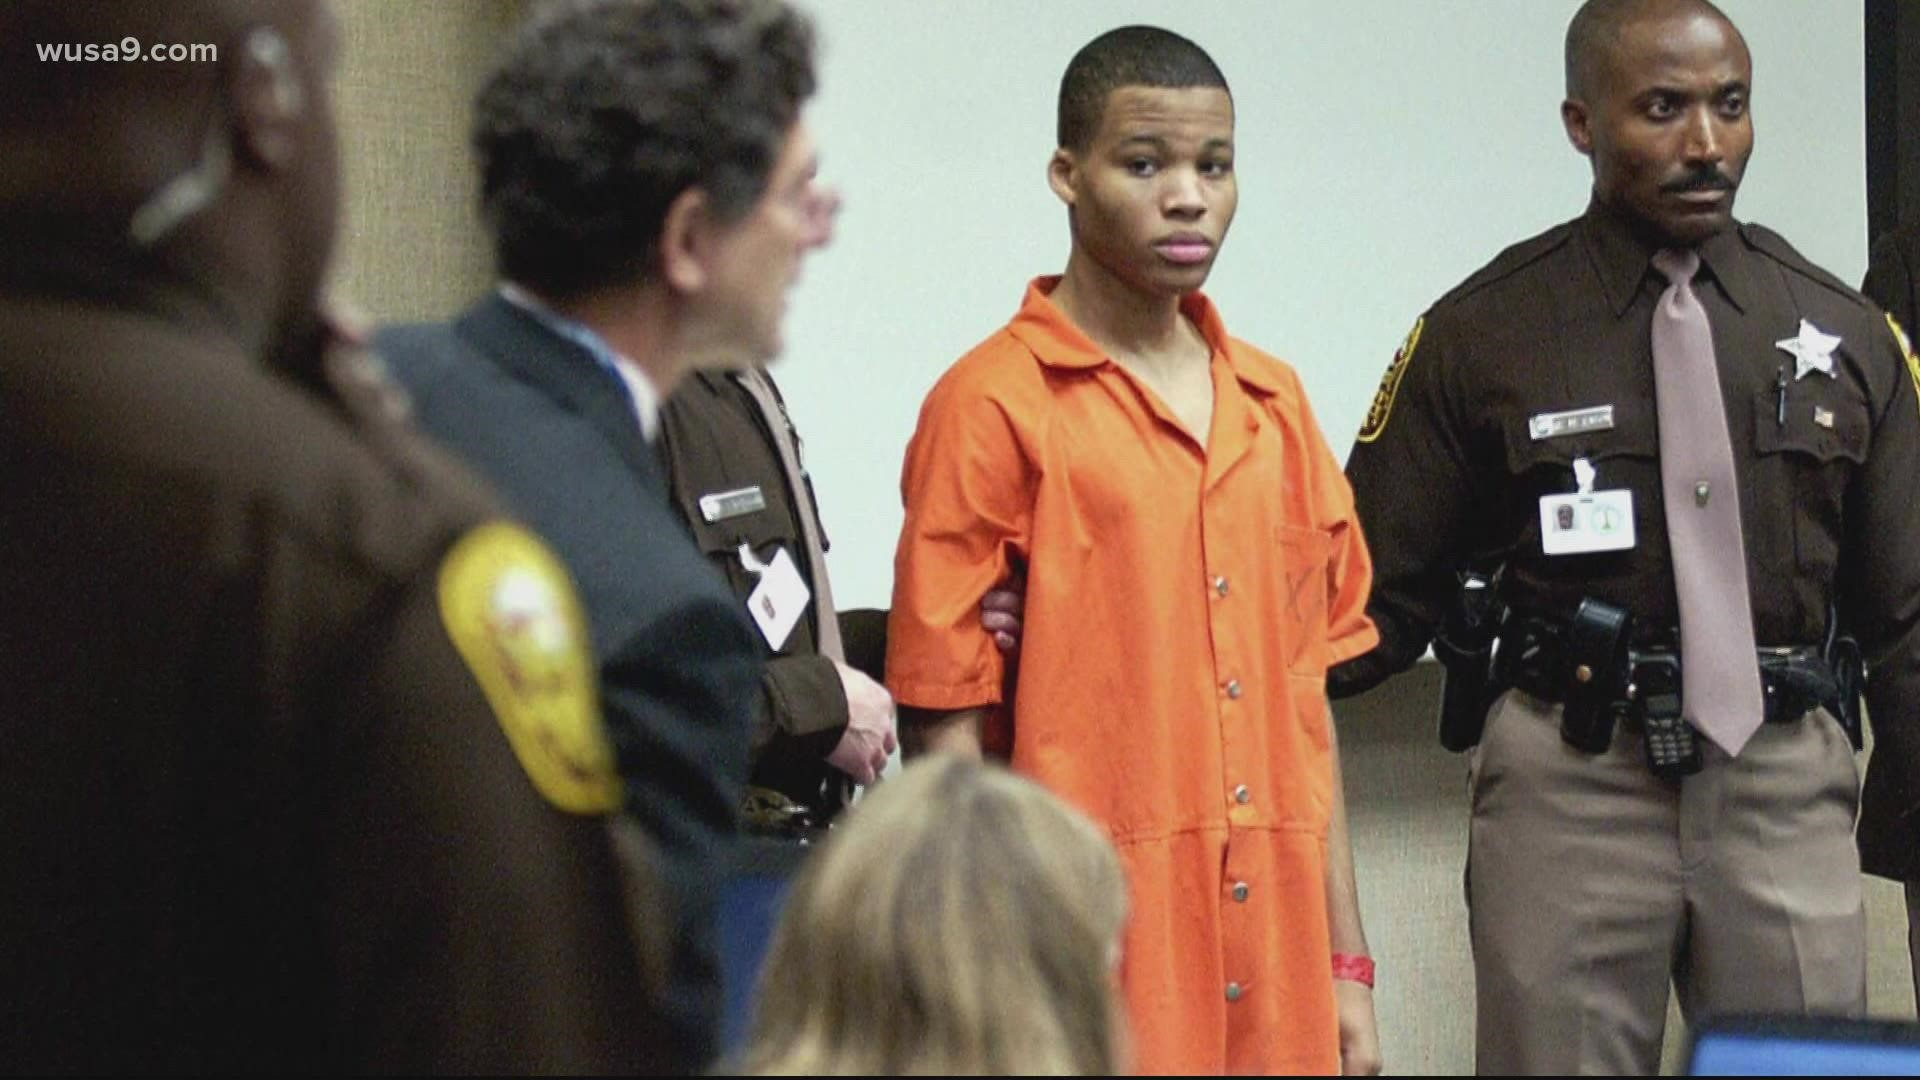 Lee Boyd Malvo was 17 when sentenced to life in prison without parole, but a Supreme Court ruling and a Maryland law passed in 2021 could change that.